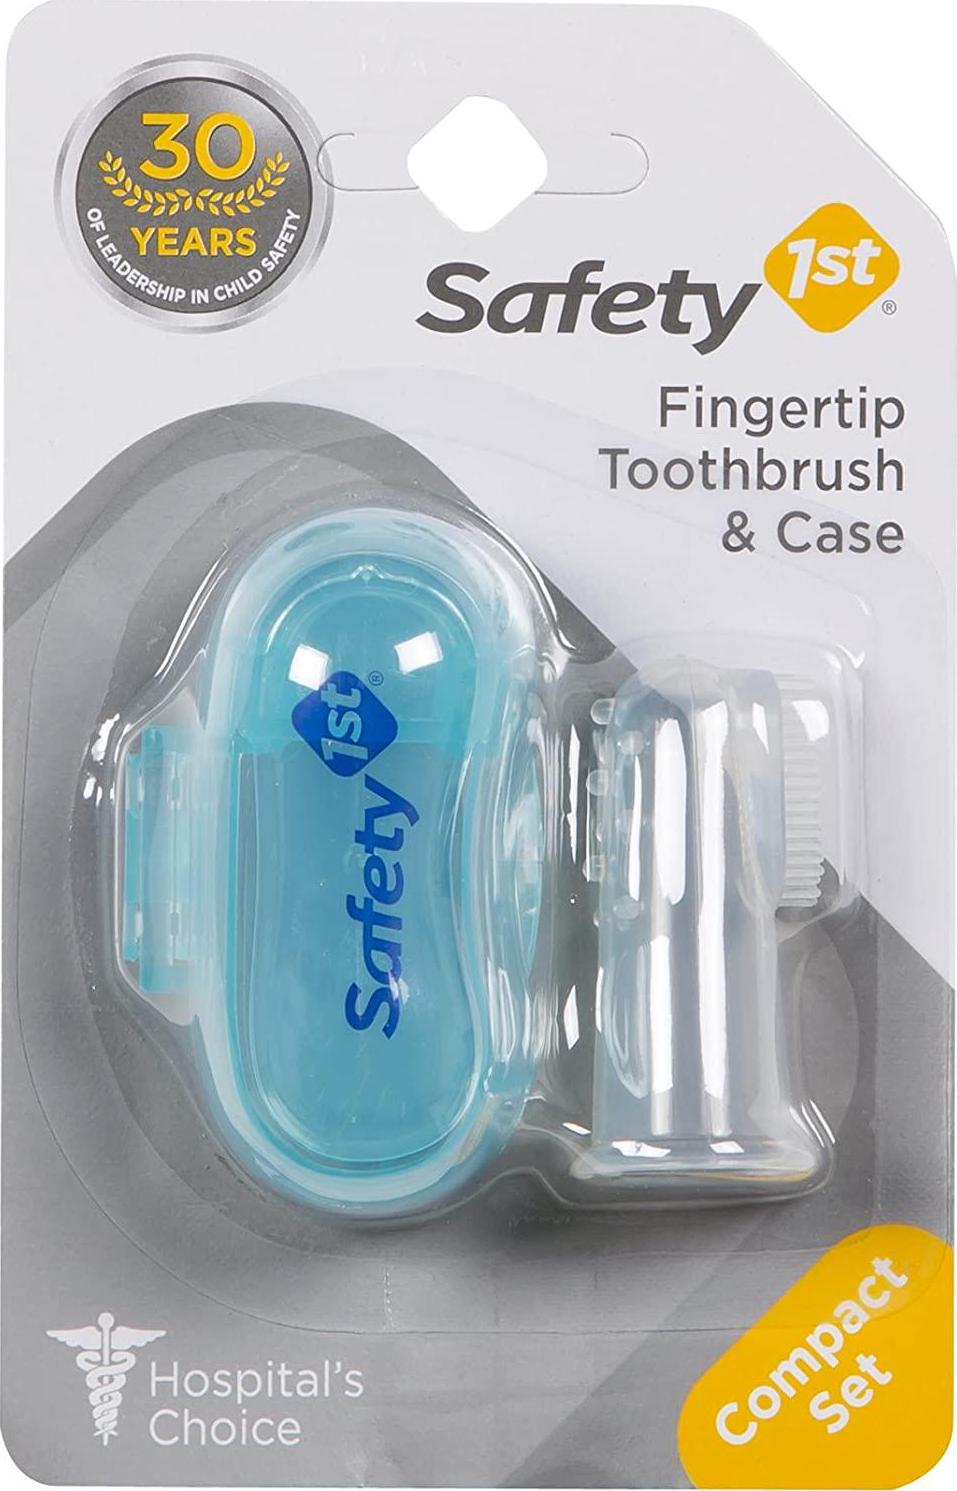 Safety 1st, Safety 1st Finger Tip Toothbrush and Case